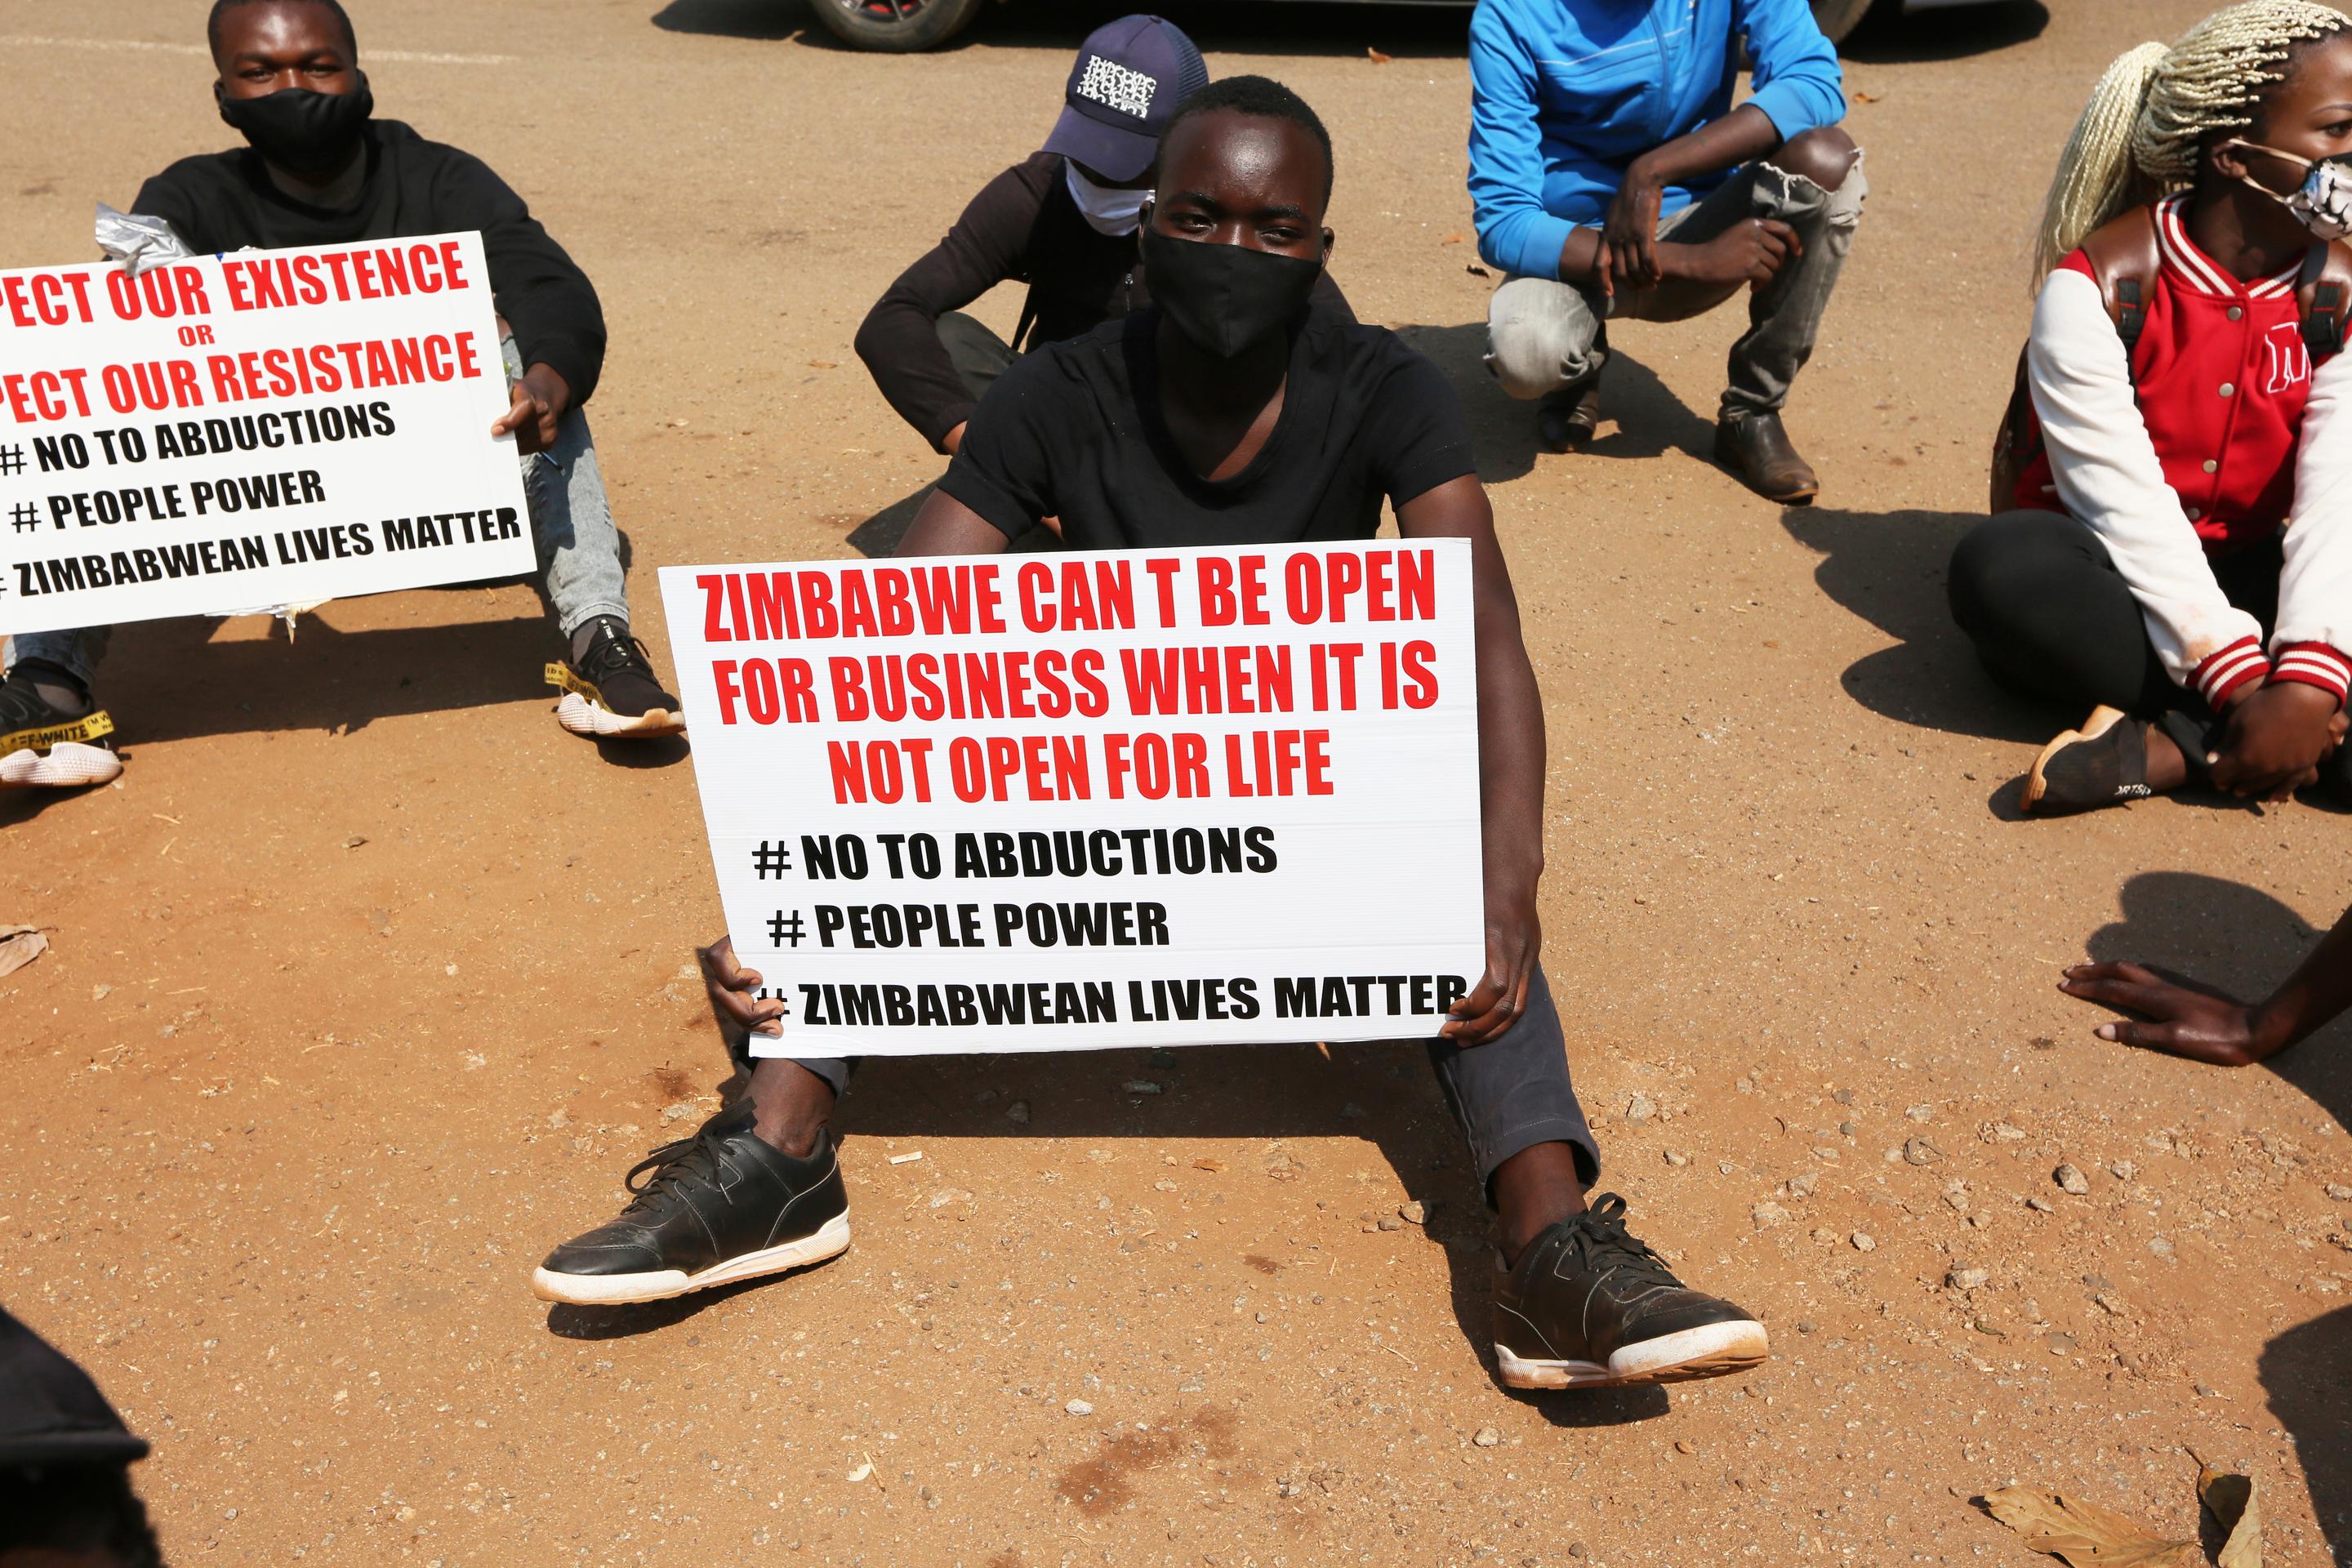 Student activist holds a banner with the text "Zimbabwe can`t be open for business when it is not open for life. #No to abductions, #People power, #Zimbabwean lives matter